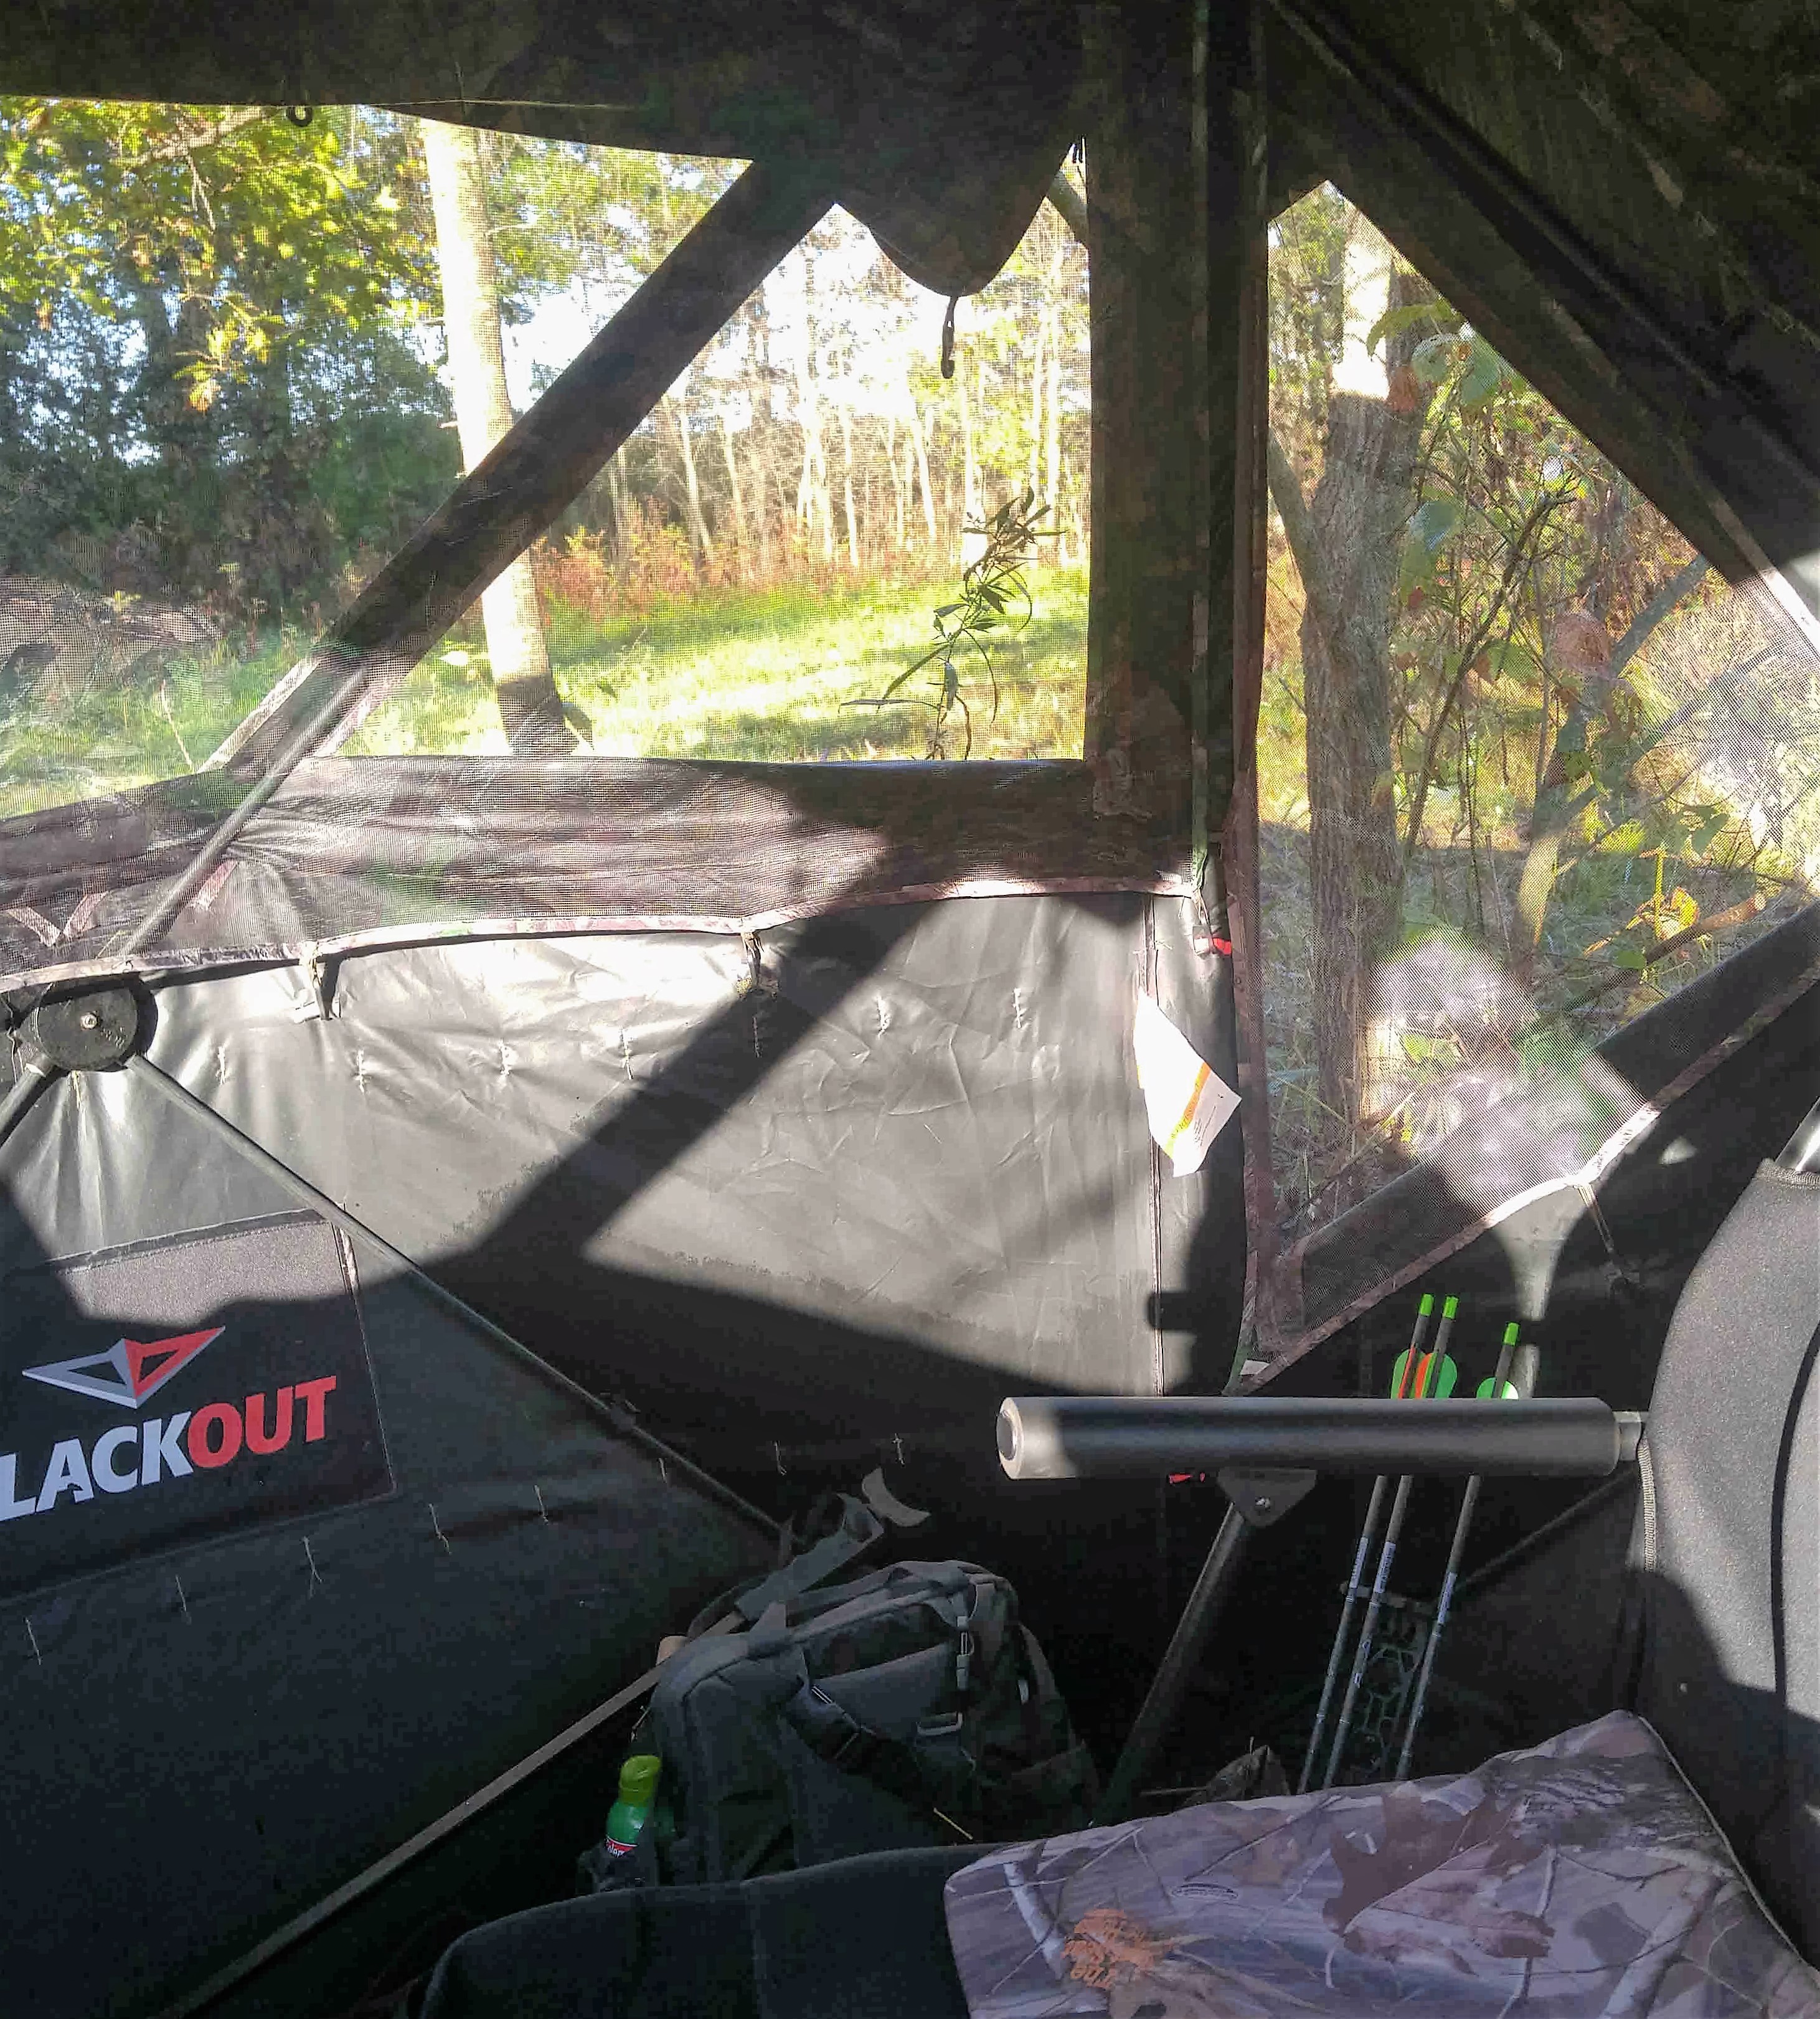 Easy set-up, durability, wide field of view and shoot-through camouflage window netting are features of Bass Pro Shops’ BlackOut Hybrid ground blind that impressed the author.